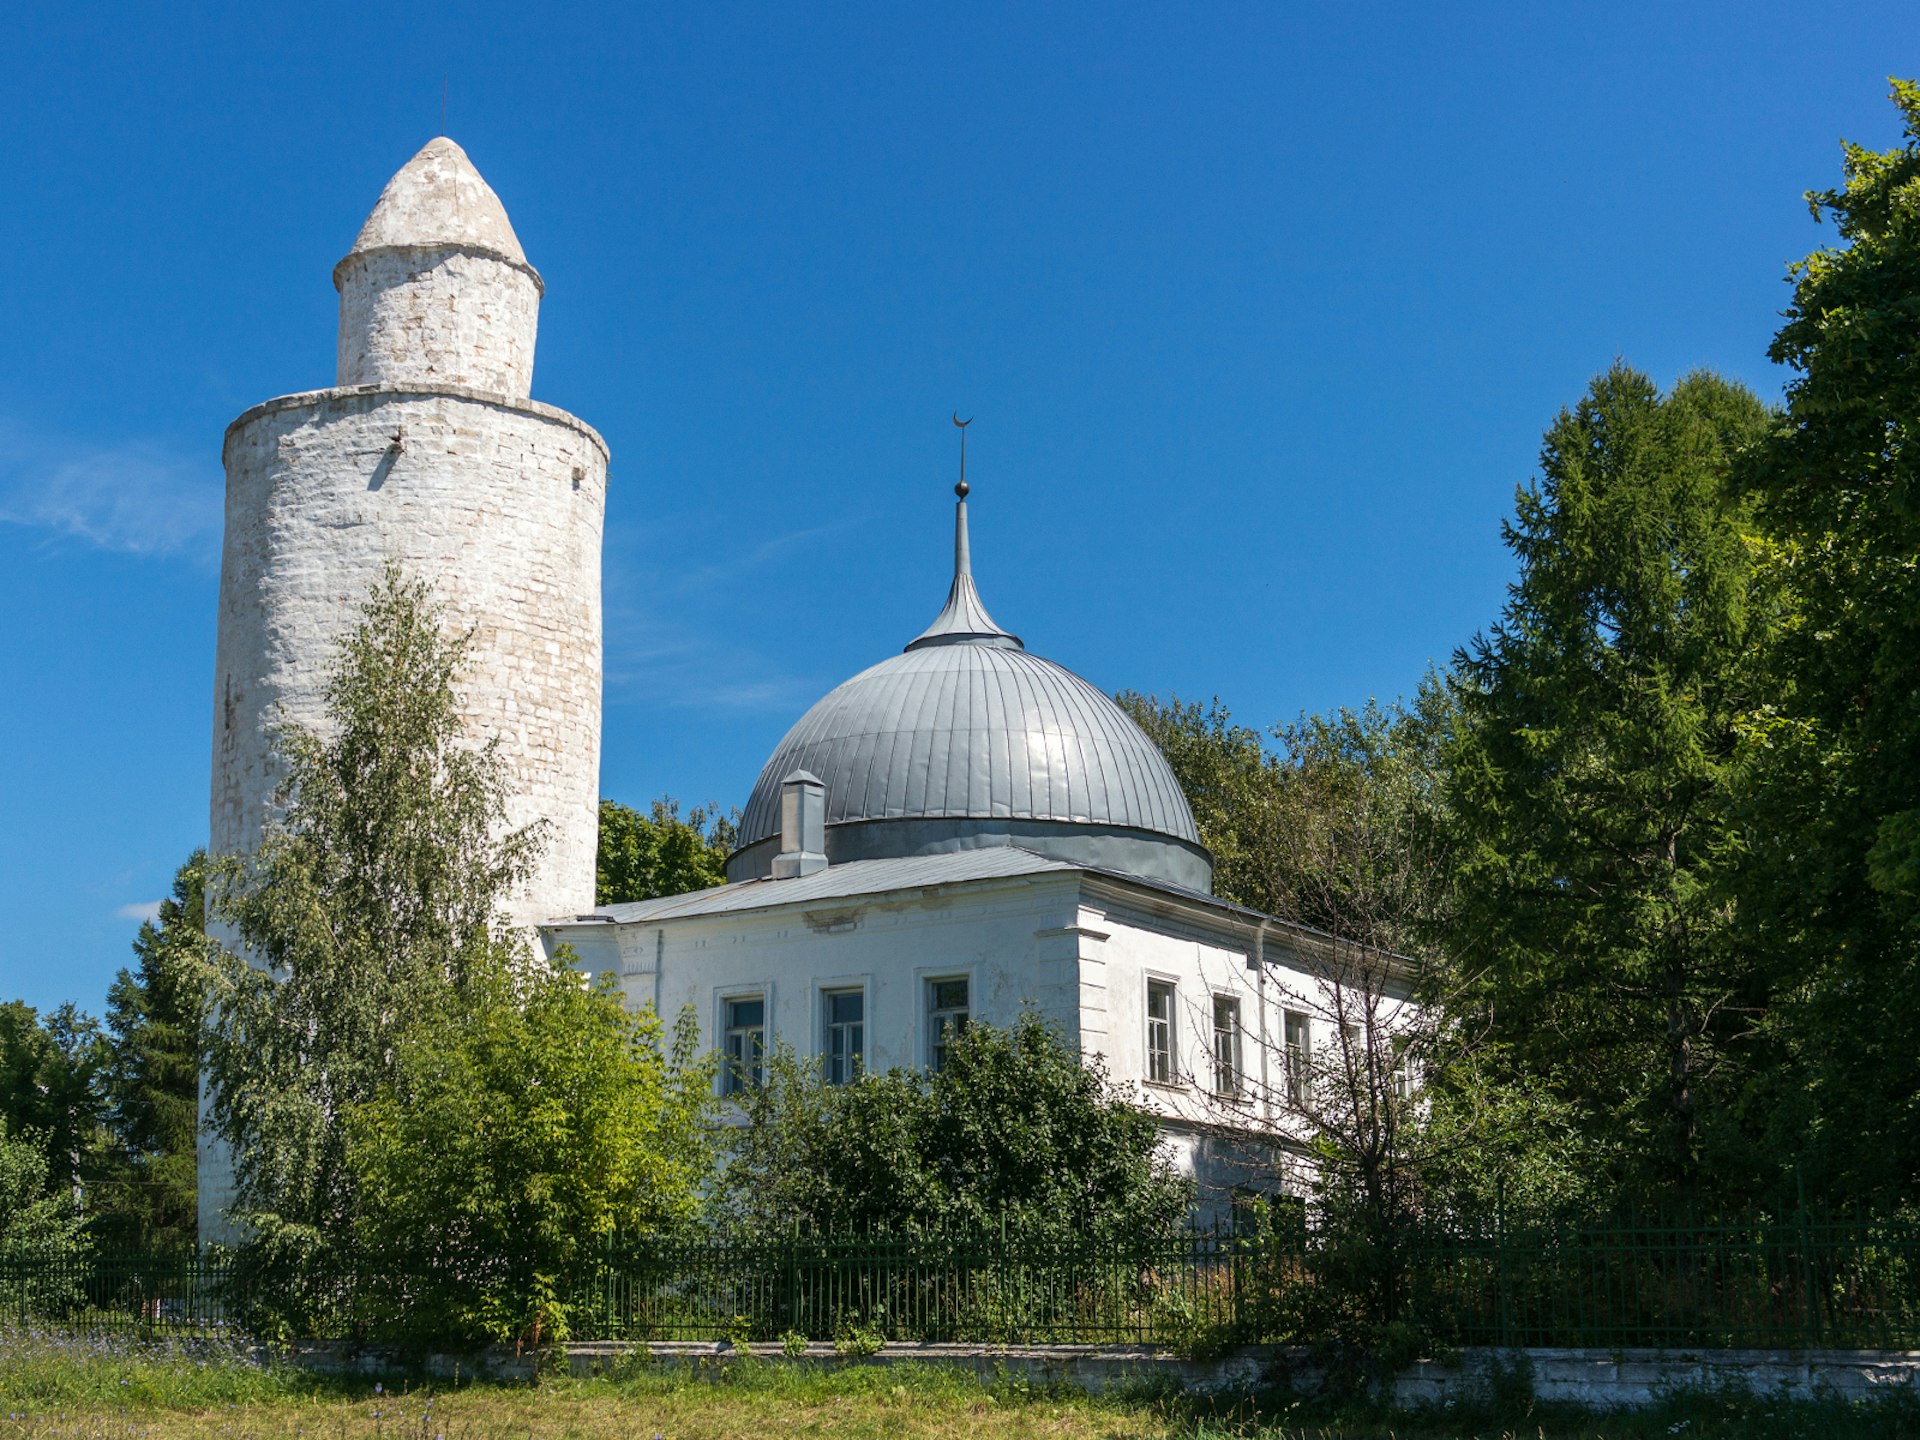 The Khan's Mosque in Kasimov, erected by the Tatars in the 15th century © Pelikh Alexey / Shutterstock